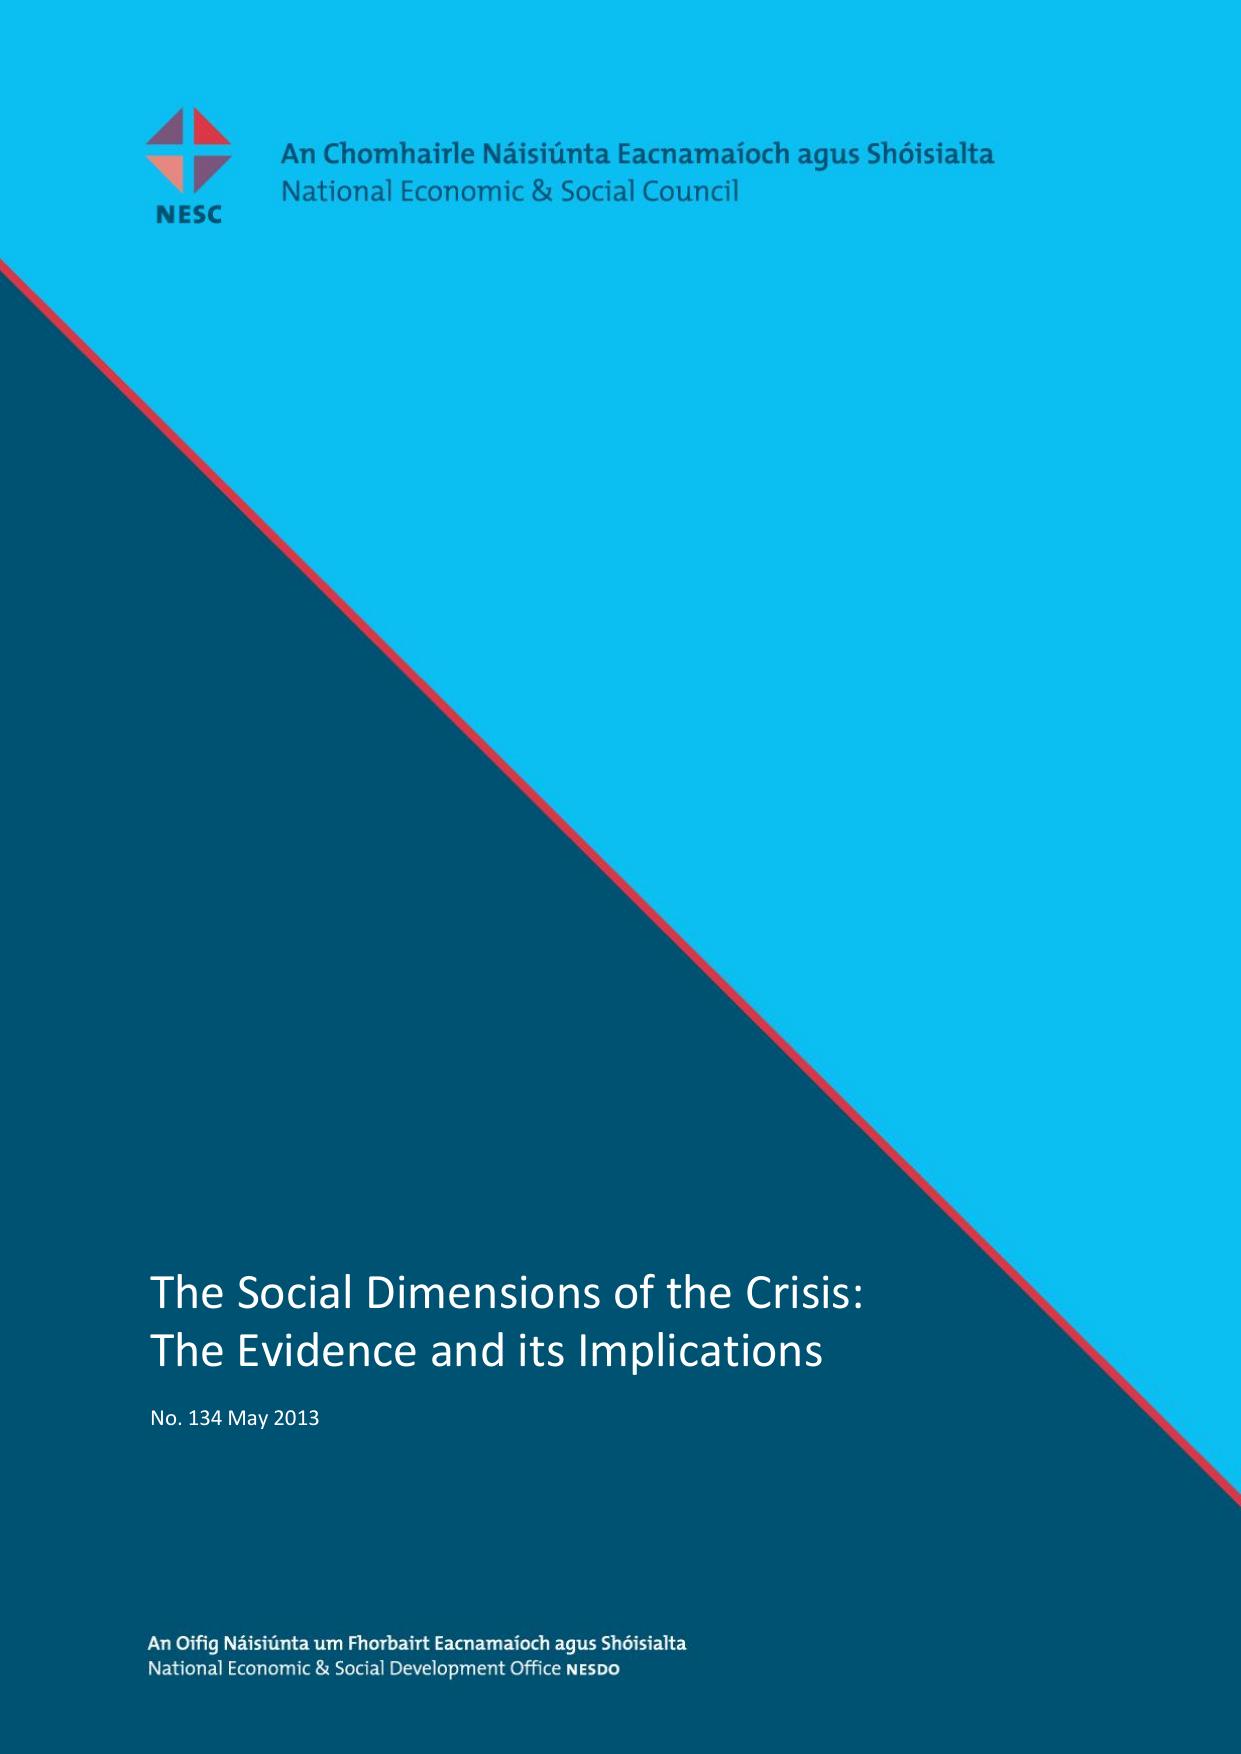 The Social Dimensions of the Crisis 2013